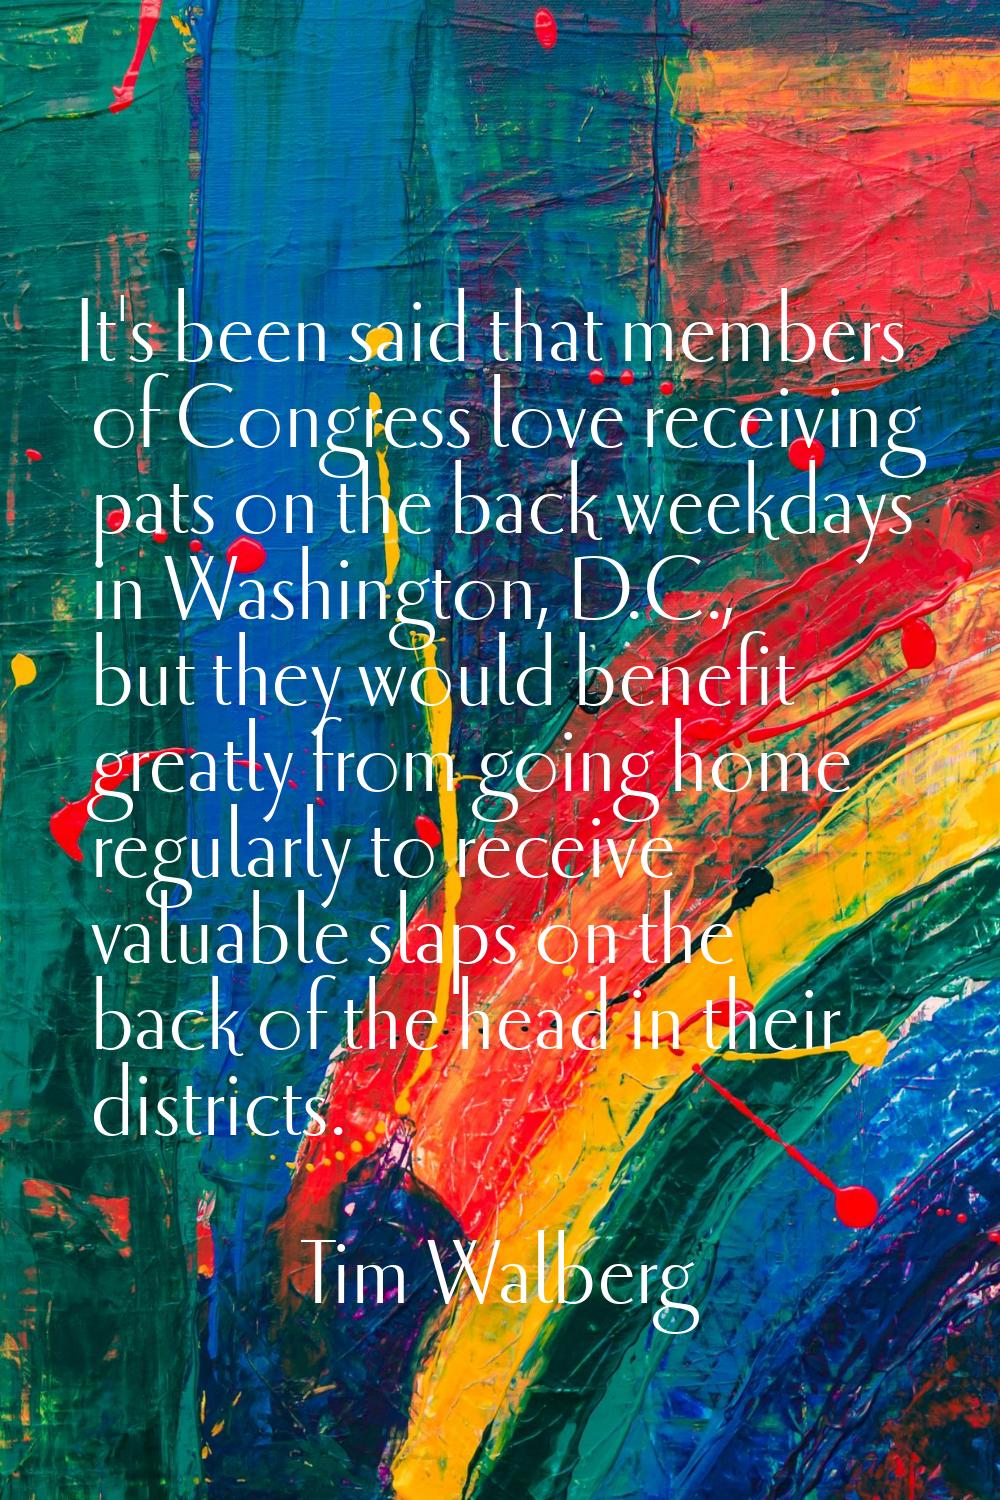 It's been said that members of Congress love receiving pats on the back weekdays in Washington, D.C